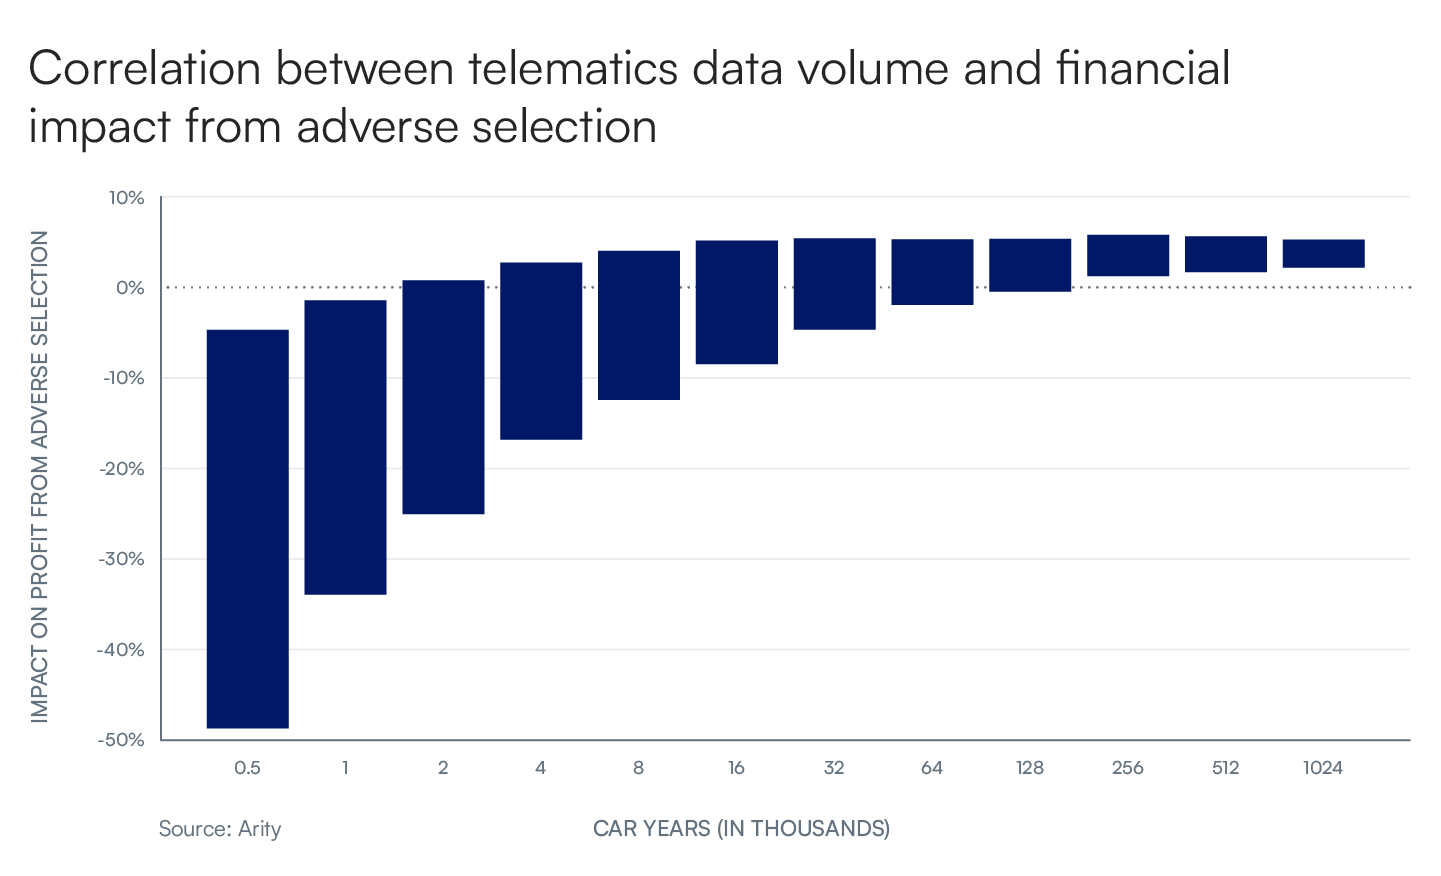 chart depicting correlation between telematics data volume and financial impact from adverse selection